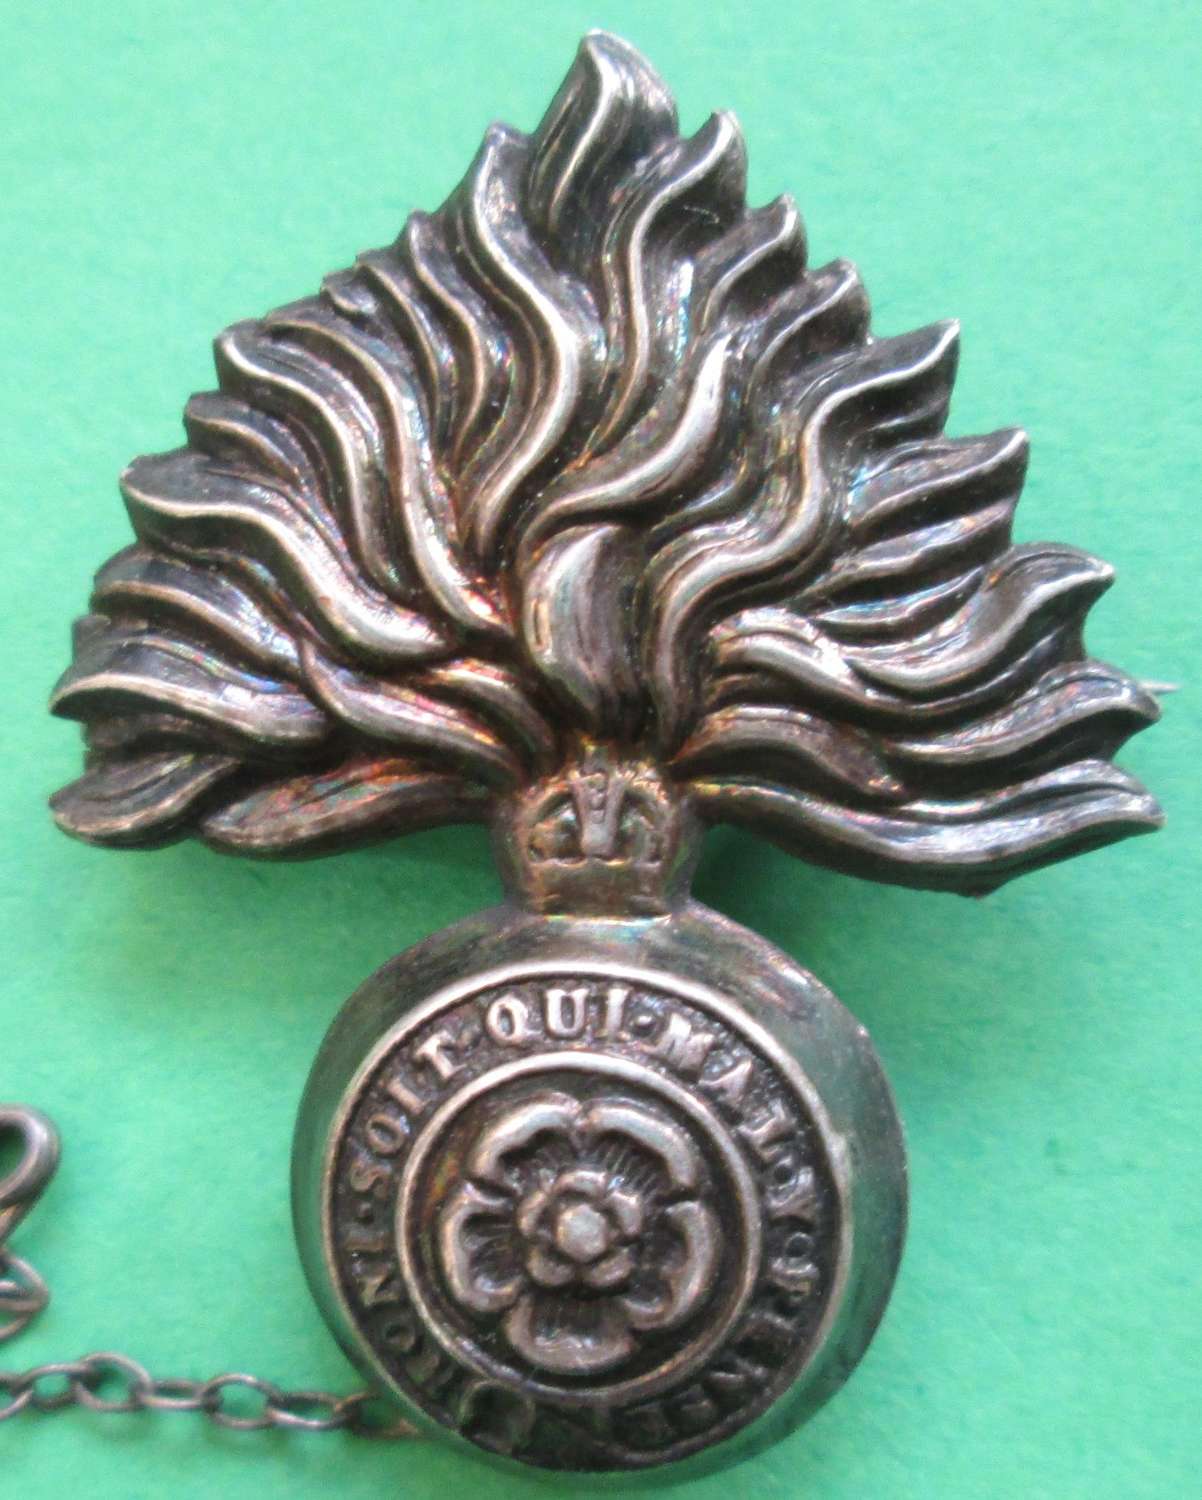 A SILVER SWEETHEART BROOCH FOR THE ROYAL FUSILIERS